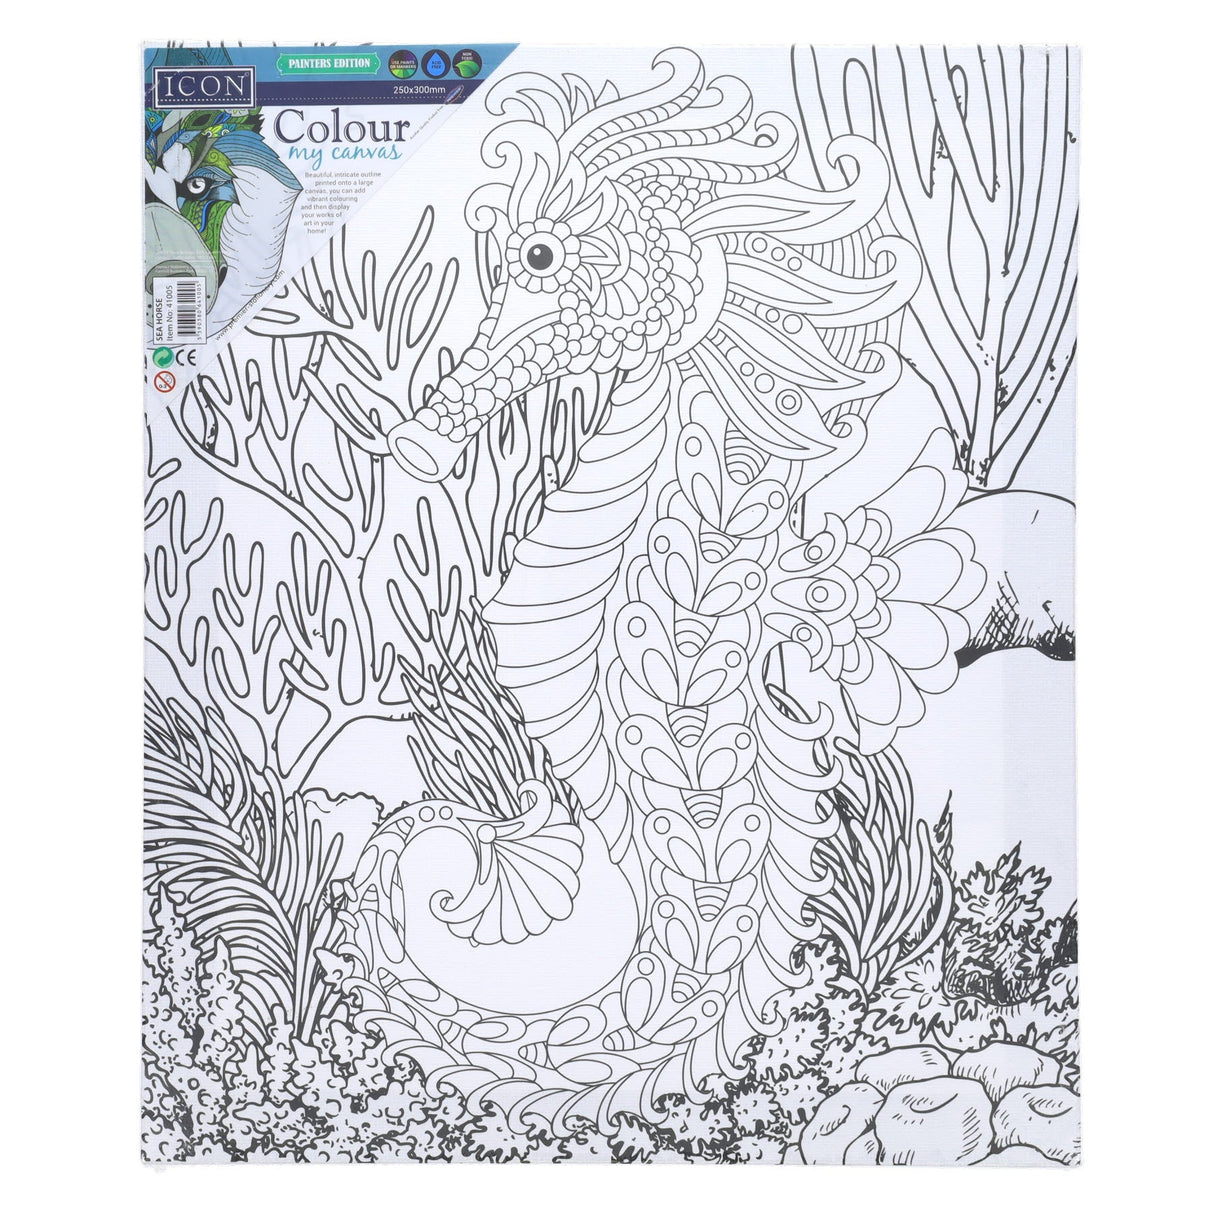 Icon Colour My Canvas - 250x300mm - Sea Horse-Colour-in Canvas-Icon|StationeryShop.co.uk